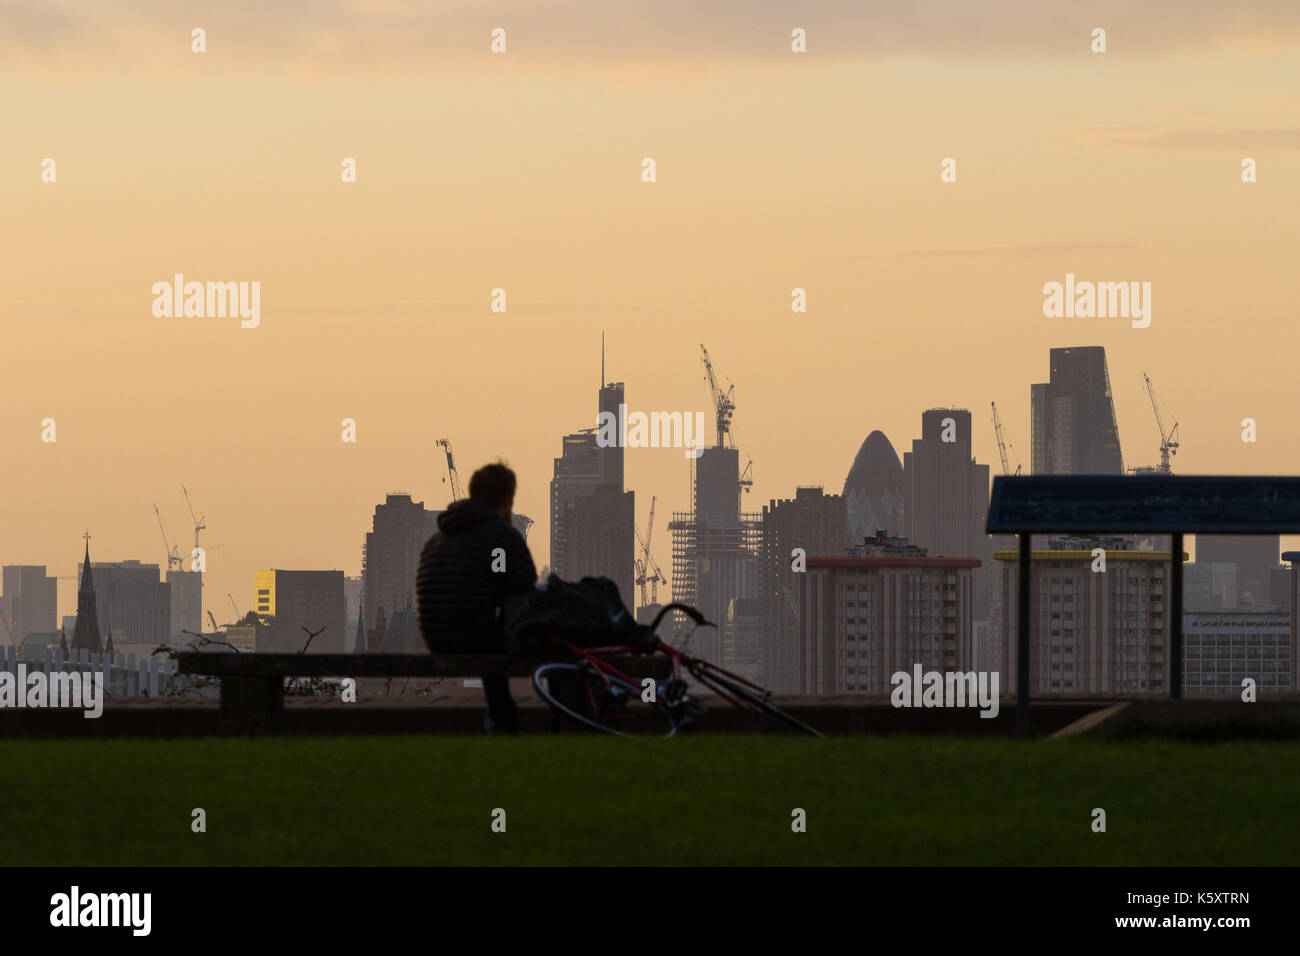 London, UK. 11th Sep, 2017. London, September 11 2017. A cyclist pauses to admire the London skyline as a new day breaks over the city. Credit: Paul Davey/Alamy Live News Stock Photo